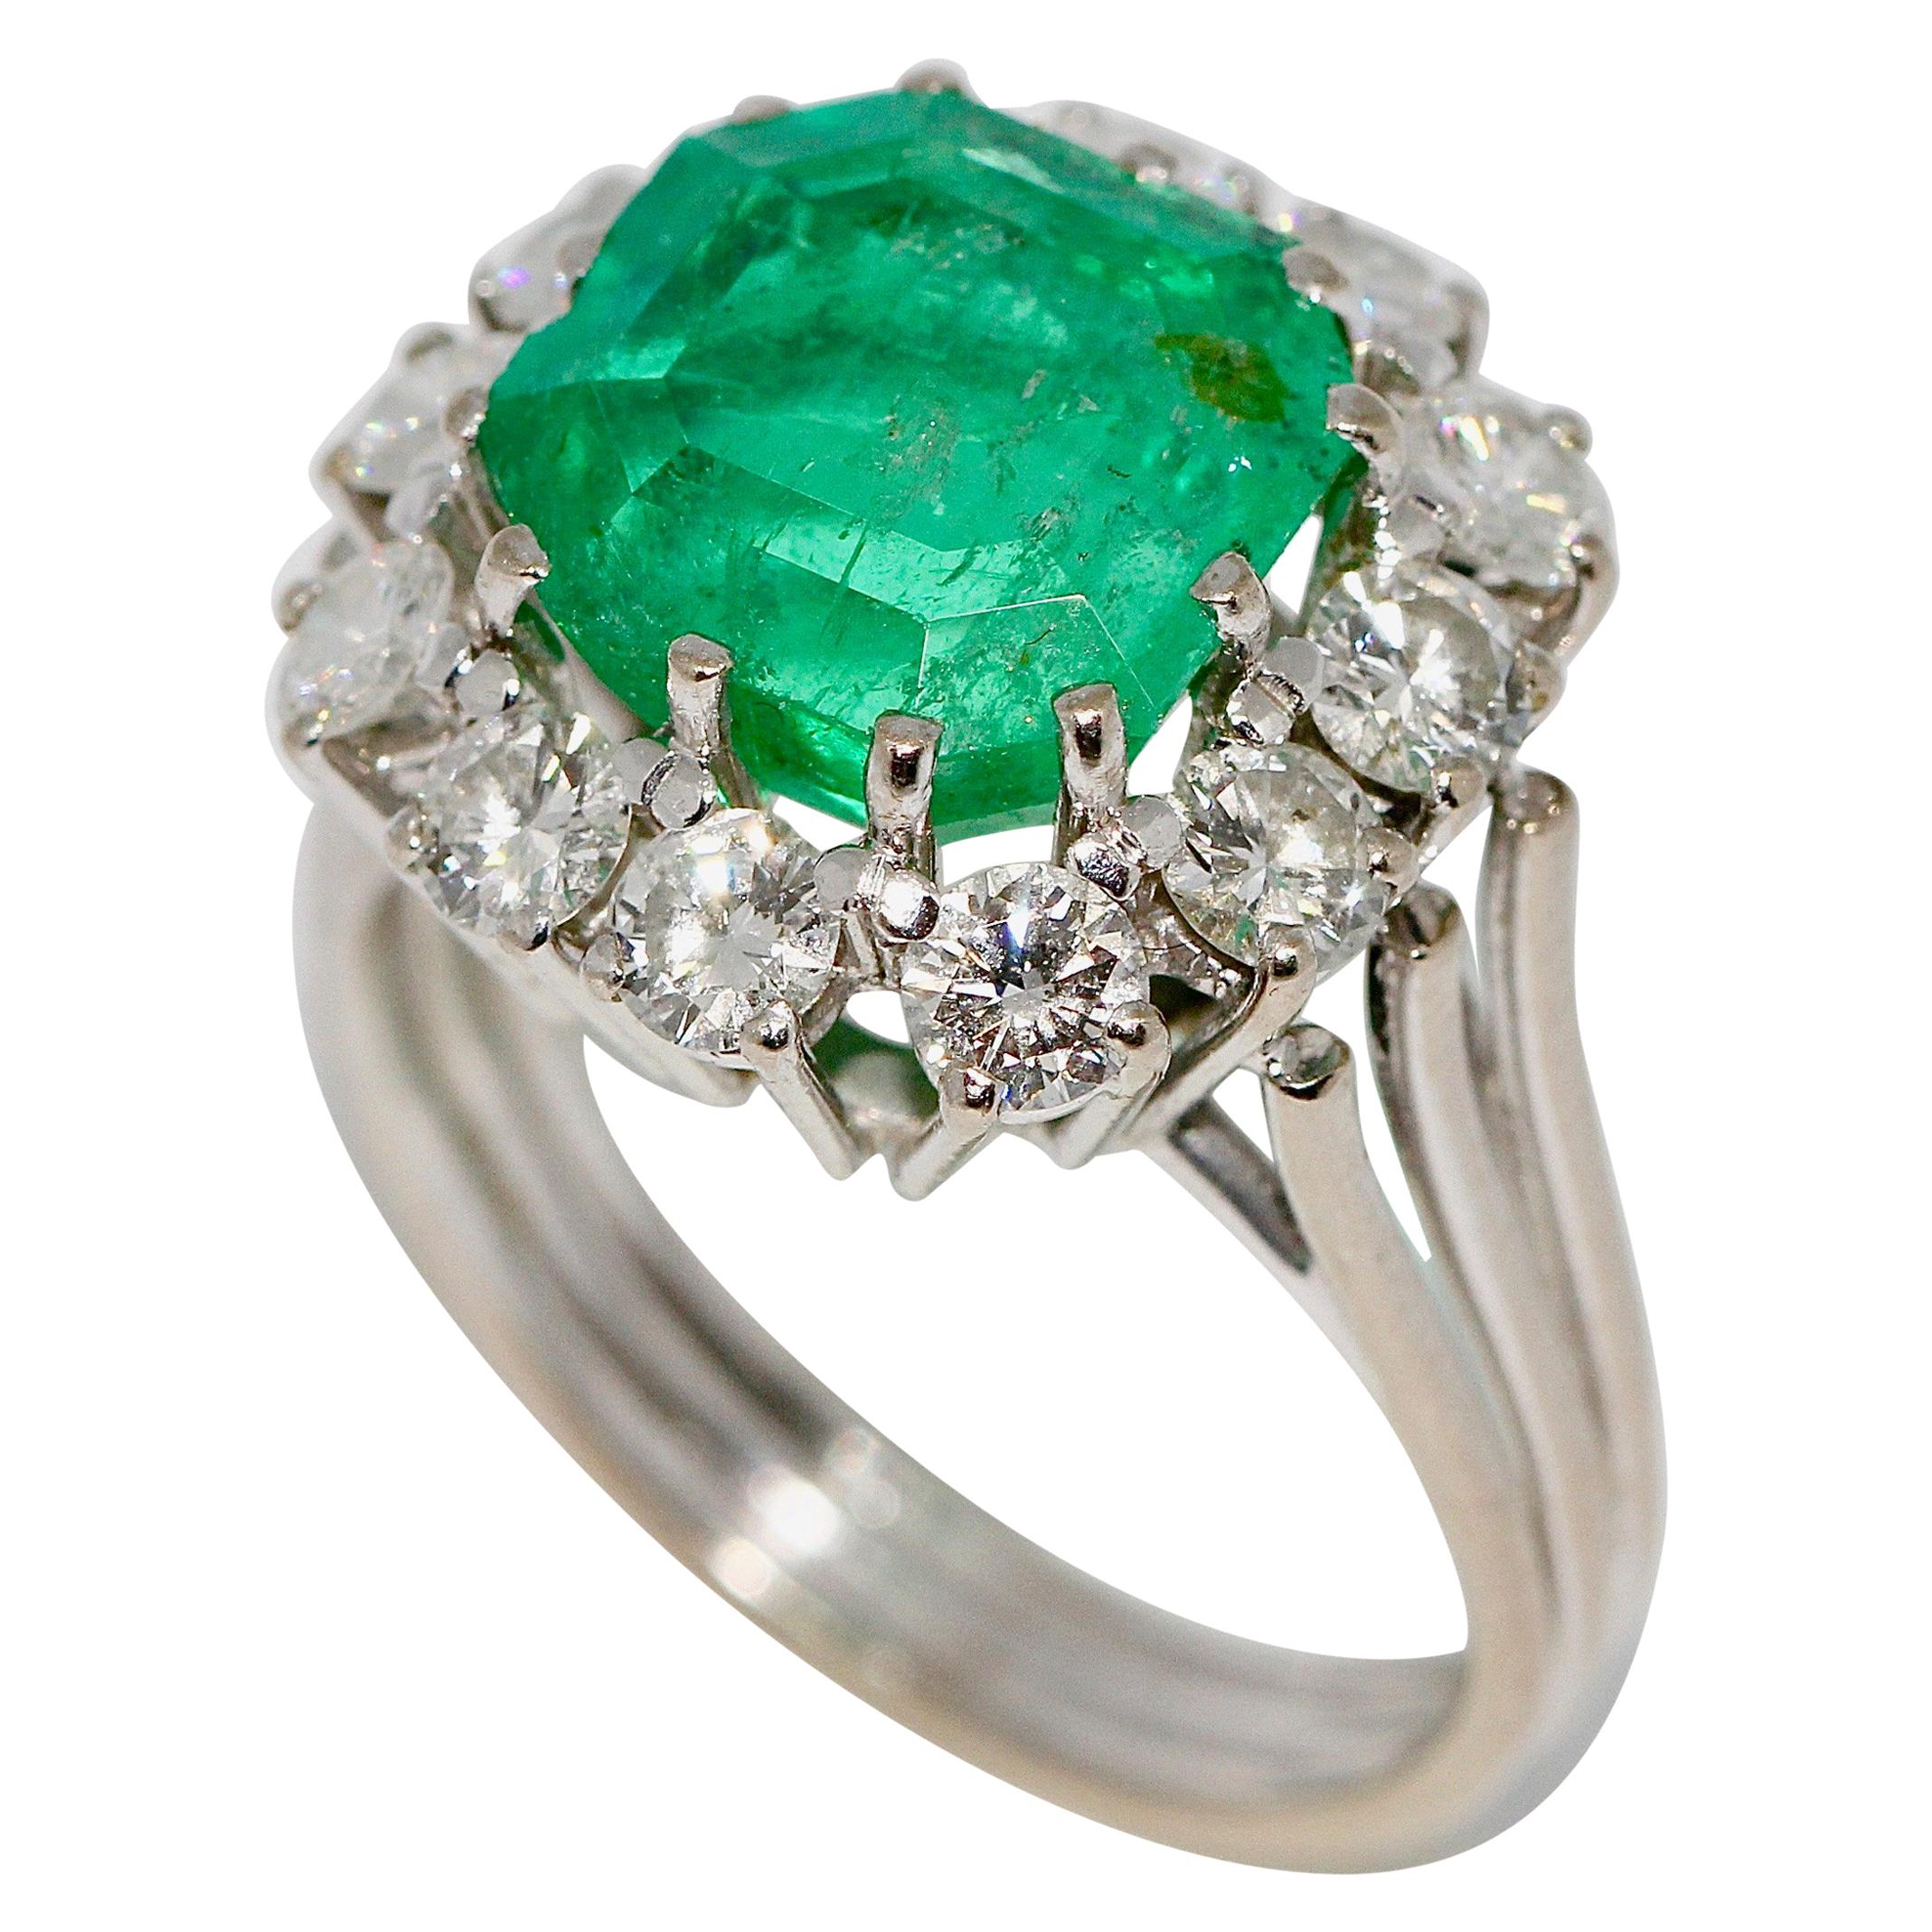 Luxurious 18 Karat White Gold Ring with Large Emerald and 12 Diamonds